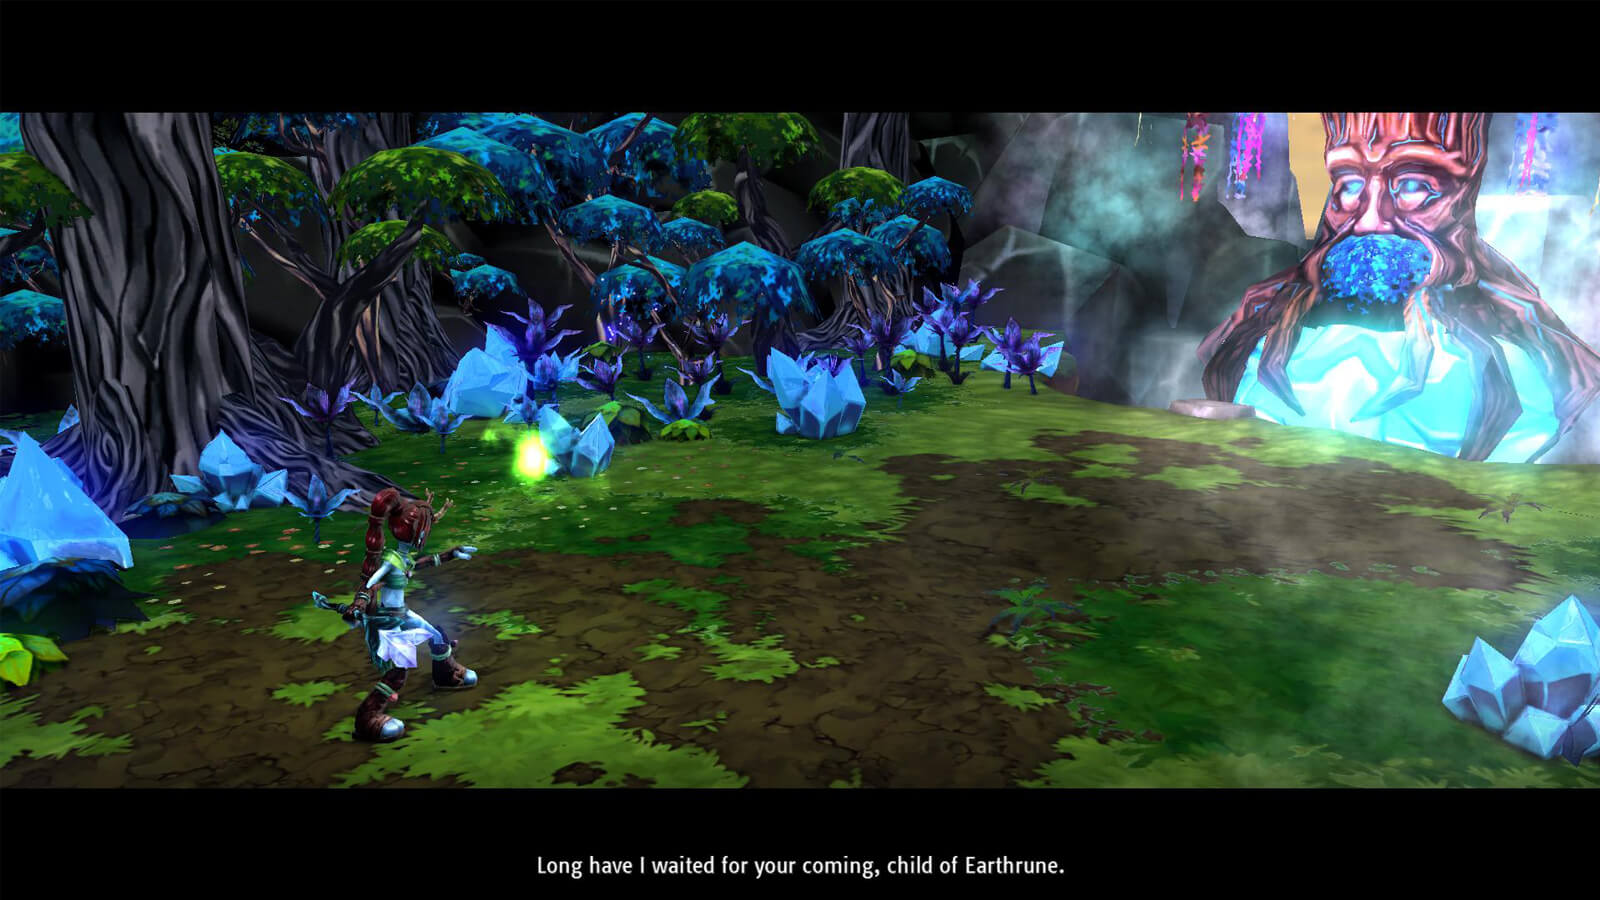 The player's character stands in a wooded clearing before a tree with a face carved into it